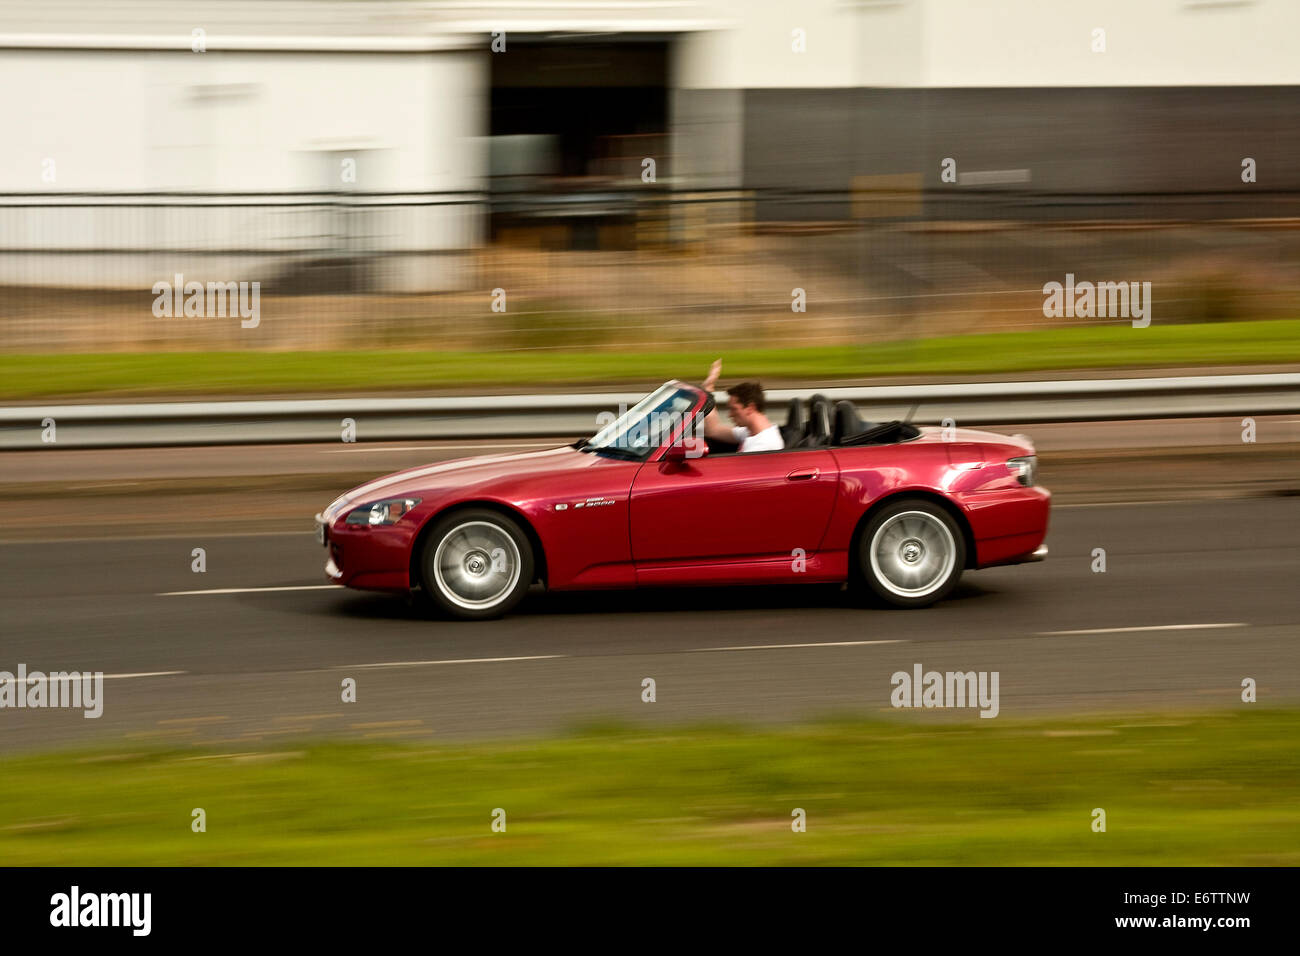 Masda S2000 Convertible Sports Car travelling along the Kingsway West Dual Carriageway in Dundee, UK Stock Photo